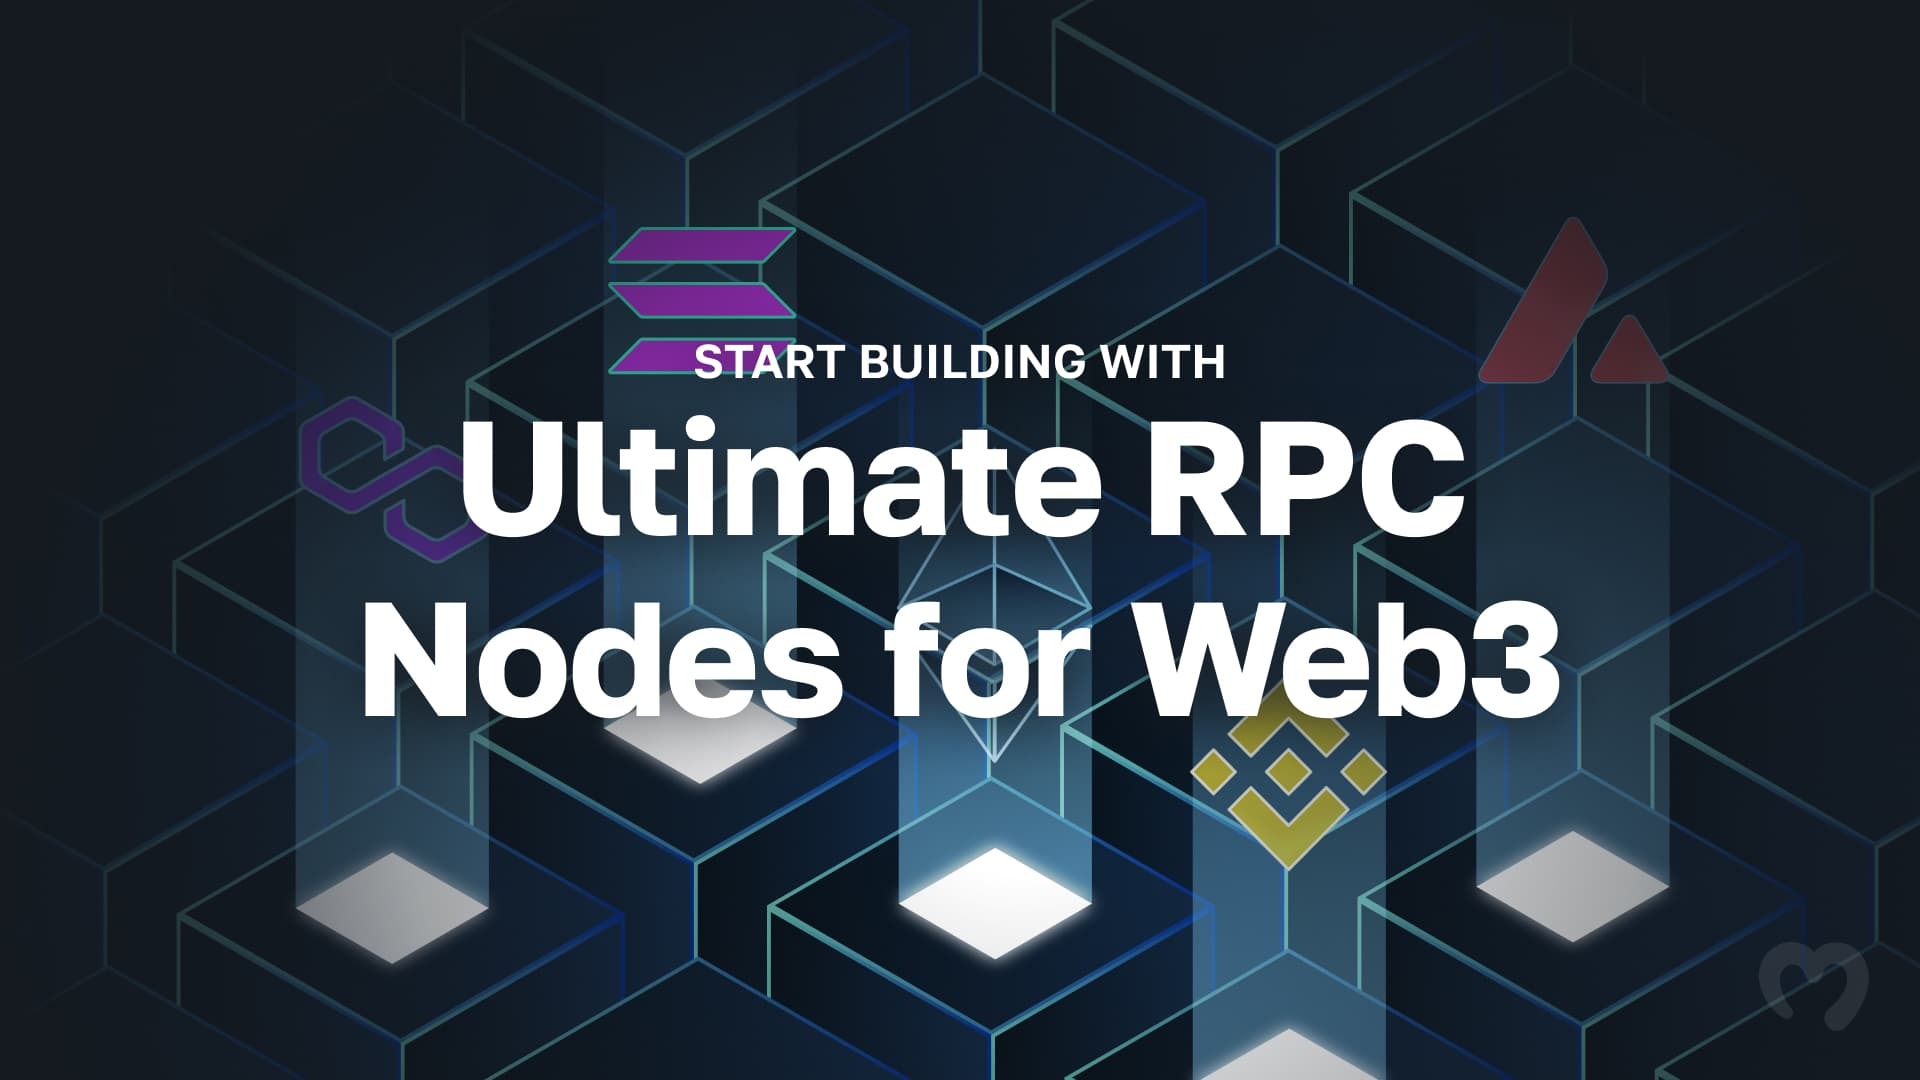 Text: "Ultimate RPC Nodes for Web3"